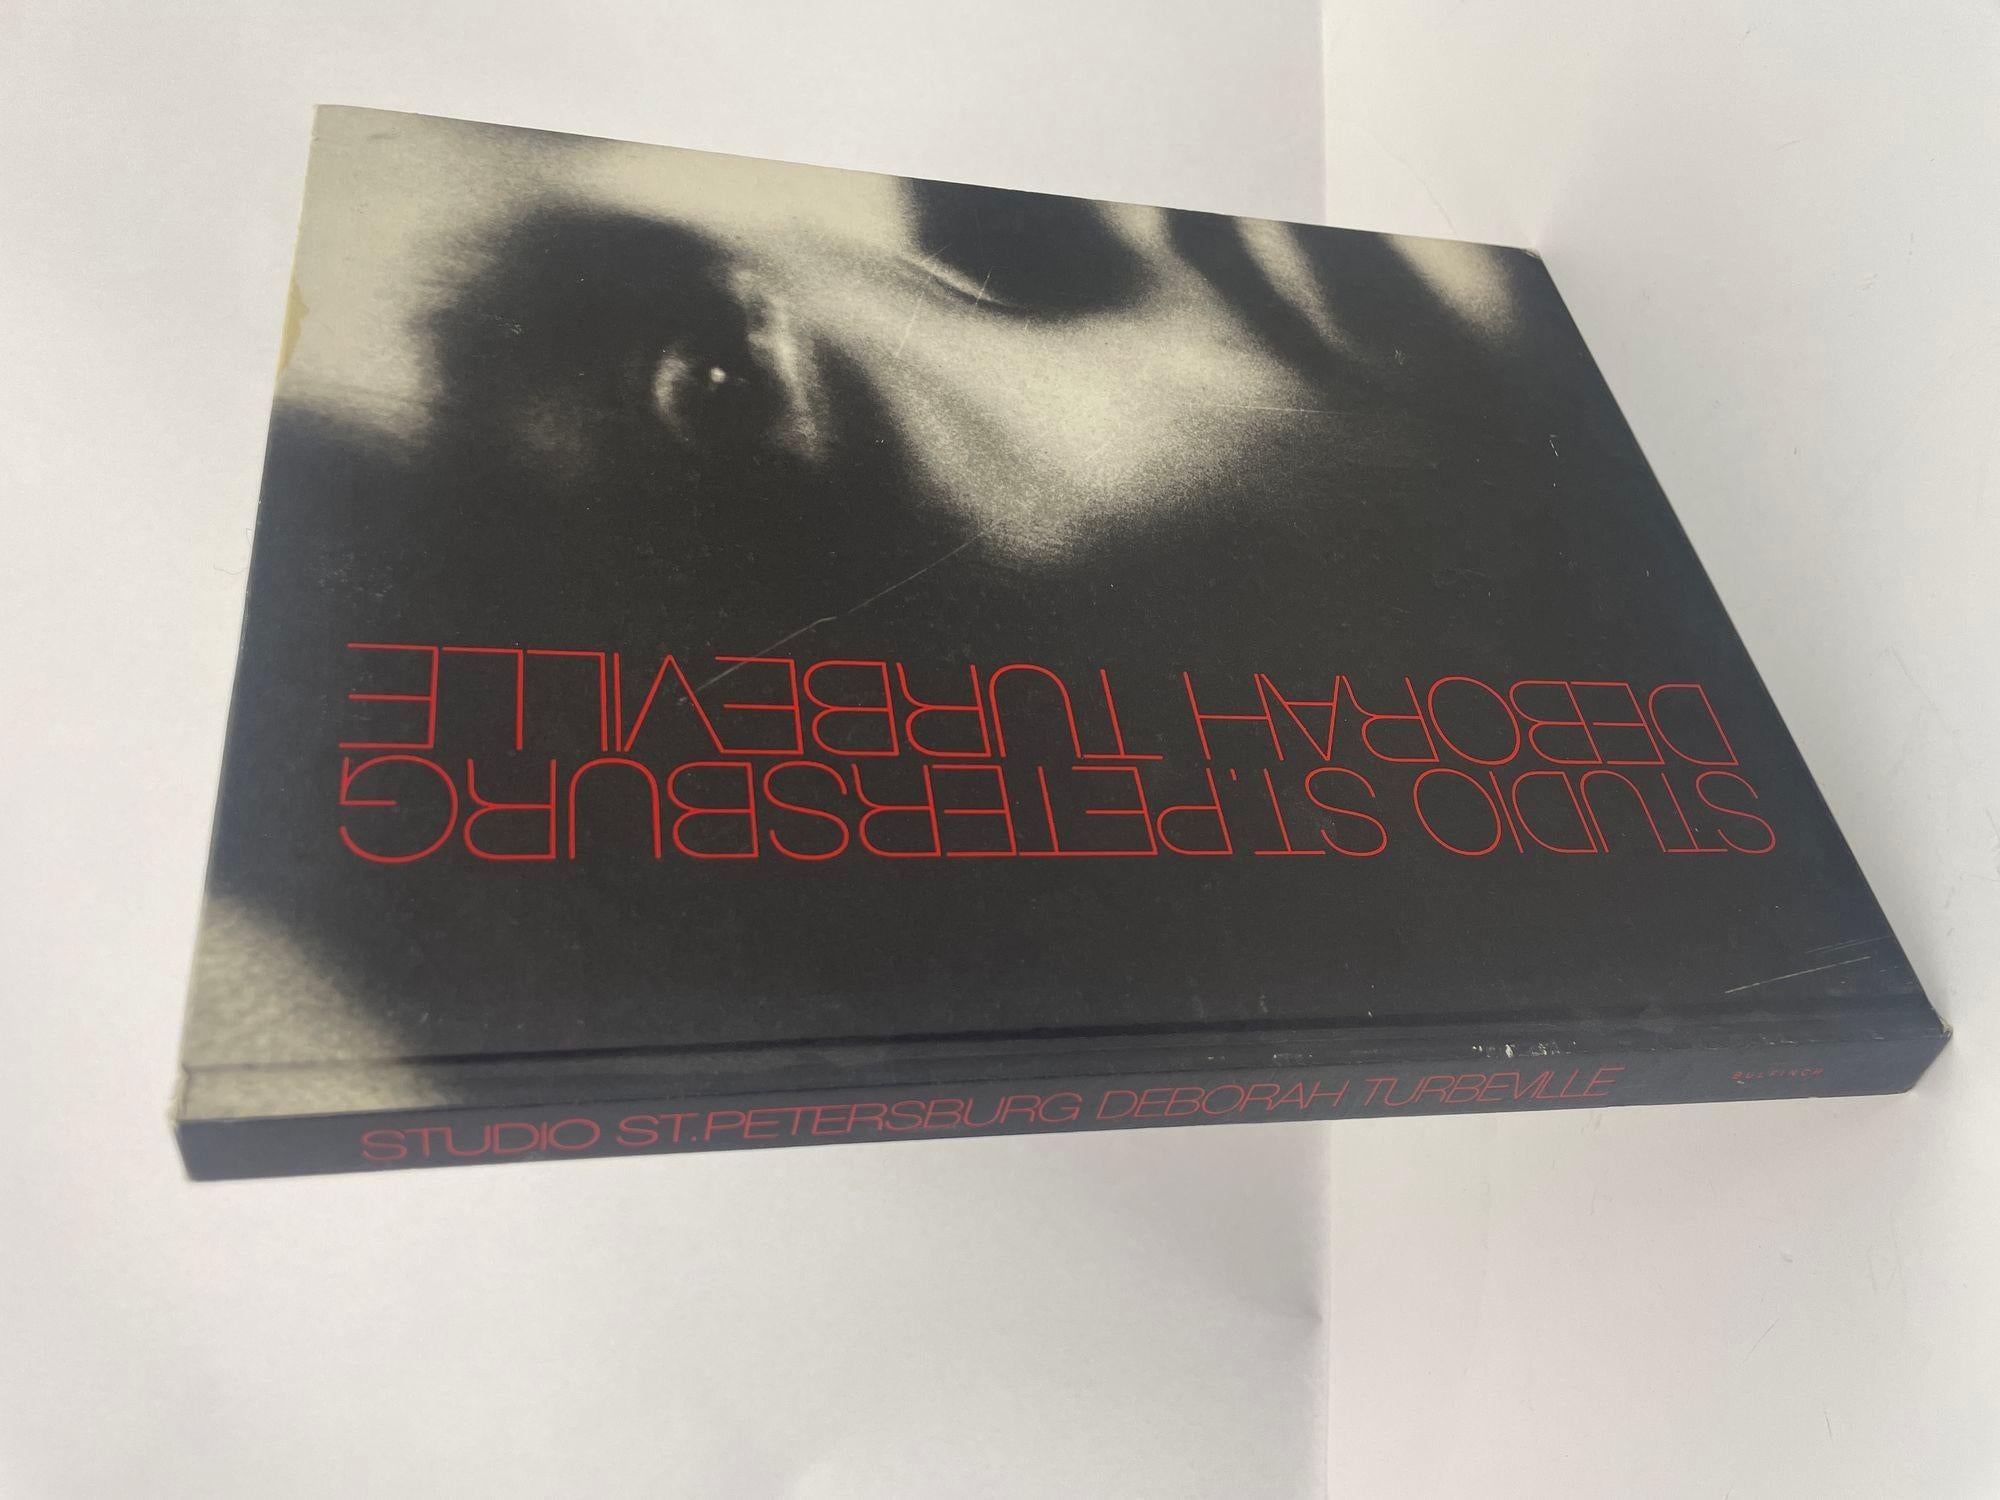 Studio St. Petersburg by Deborah Turbeville 1997 by Bulfinch Press 1st Ed.
In her previous books on Versailles and Newport, photographer Deborah Turbeville has succeeded in brilliantly evoking the moods, auras, ghosts, and allure of each place's